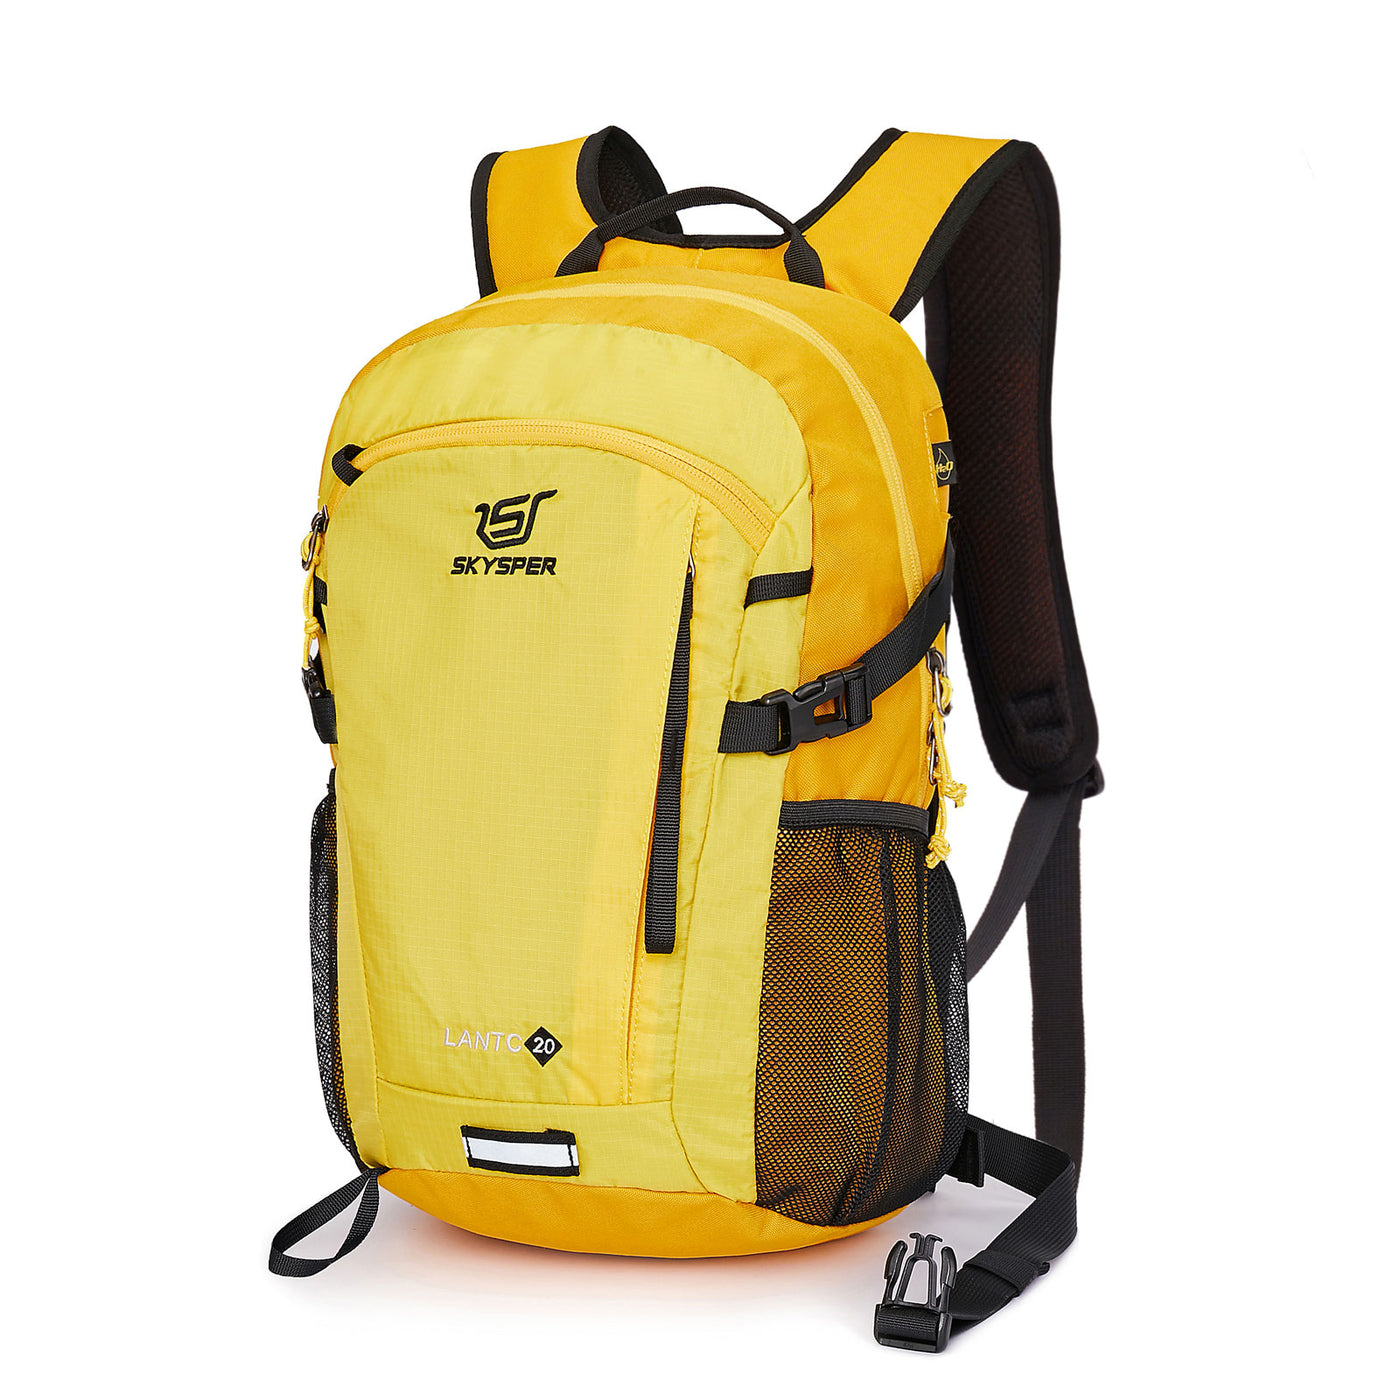 LANTC20, 20L Small Backpack